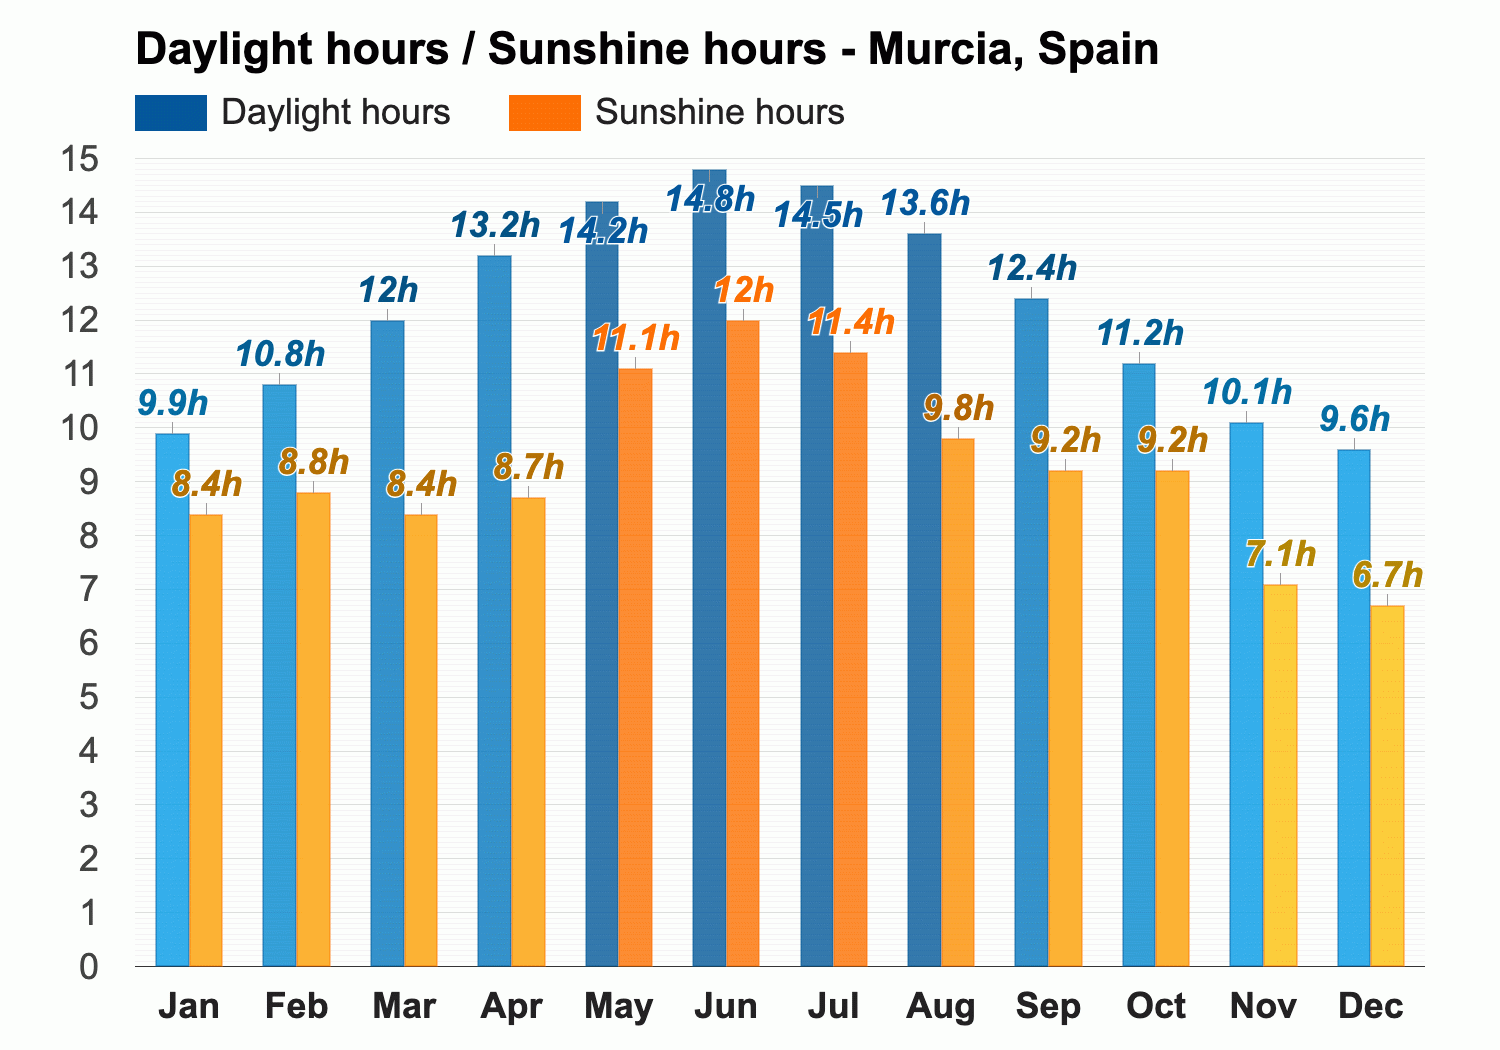 Murcia, Spain - Climate & Monthly weather forecast